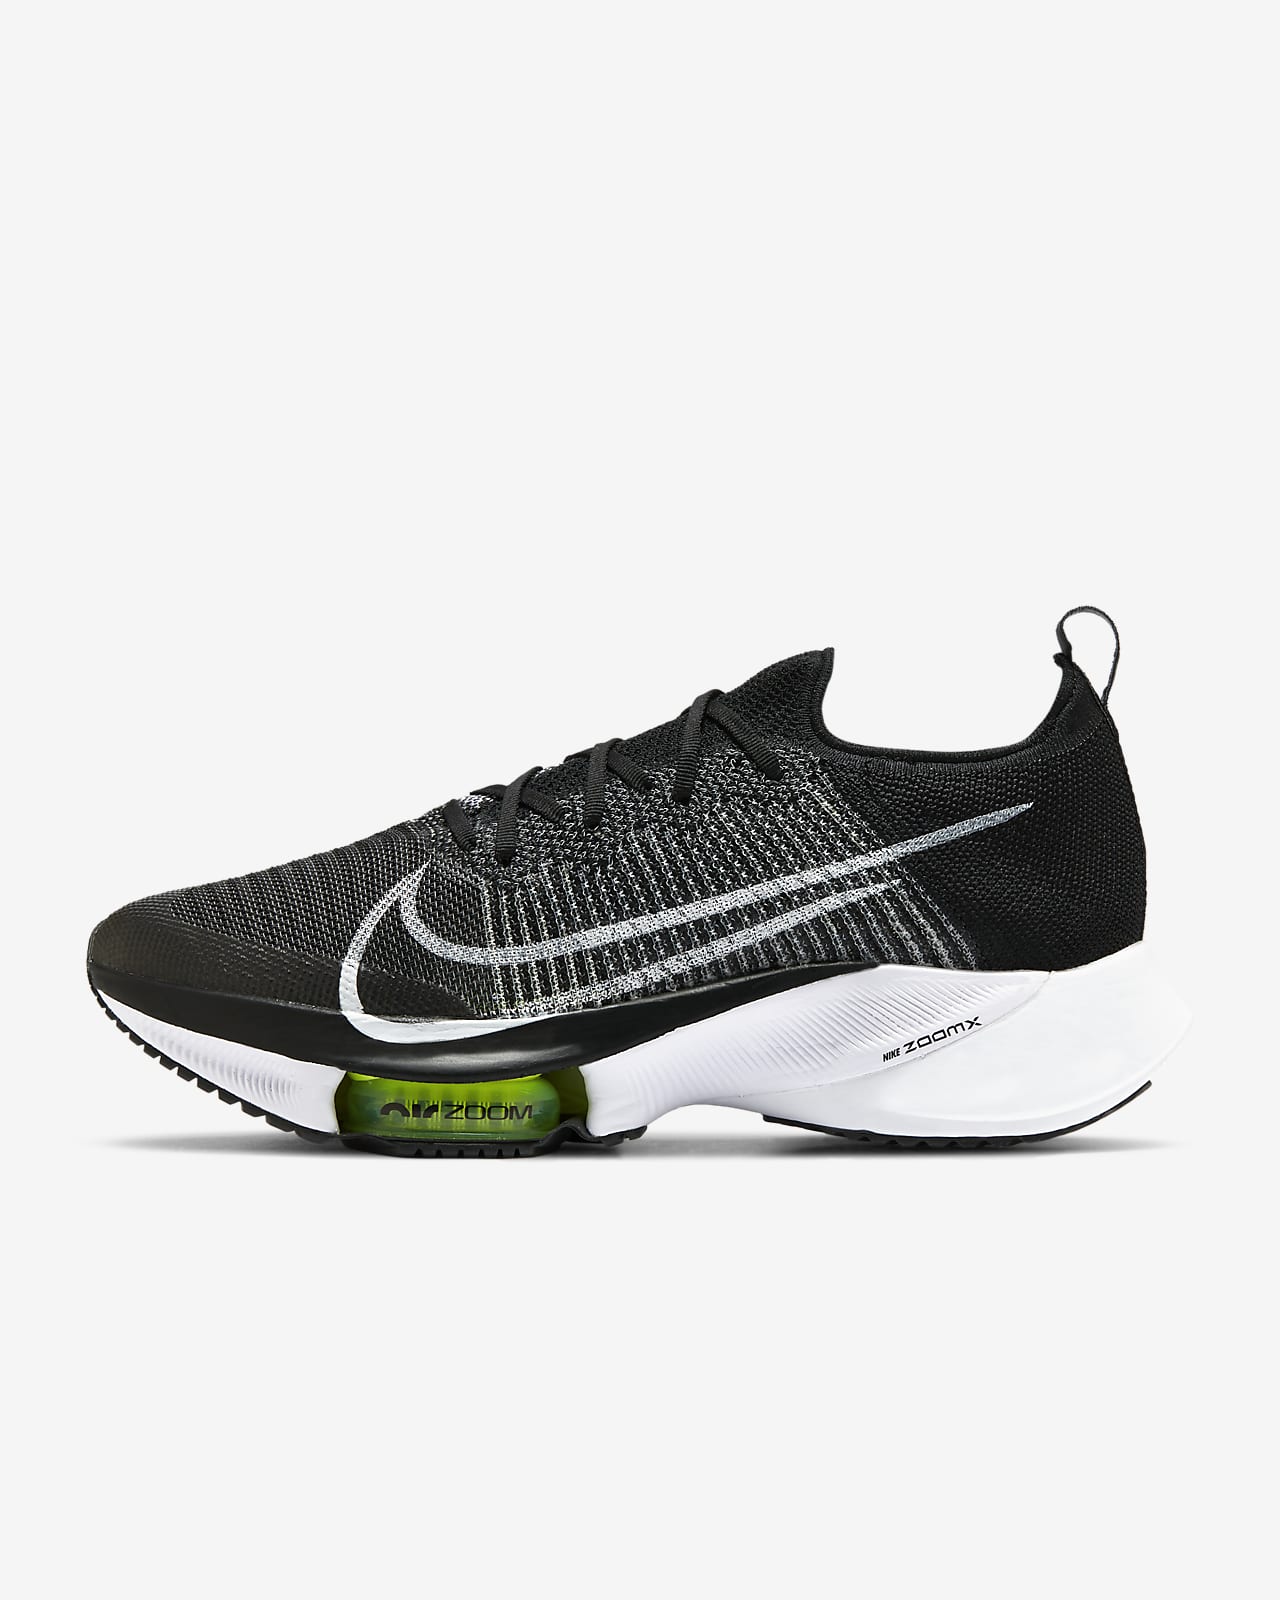 nike zoom shoes new model 2018